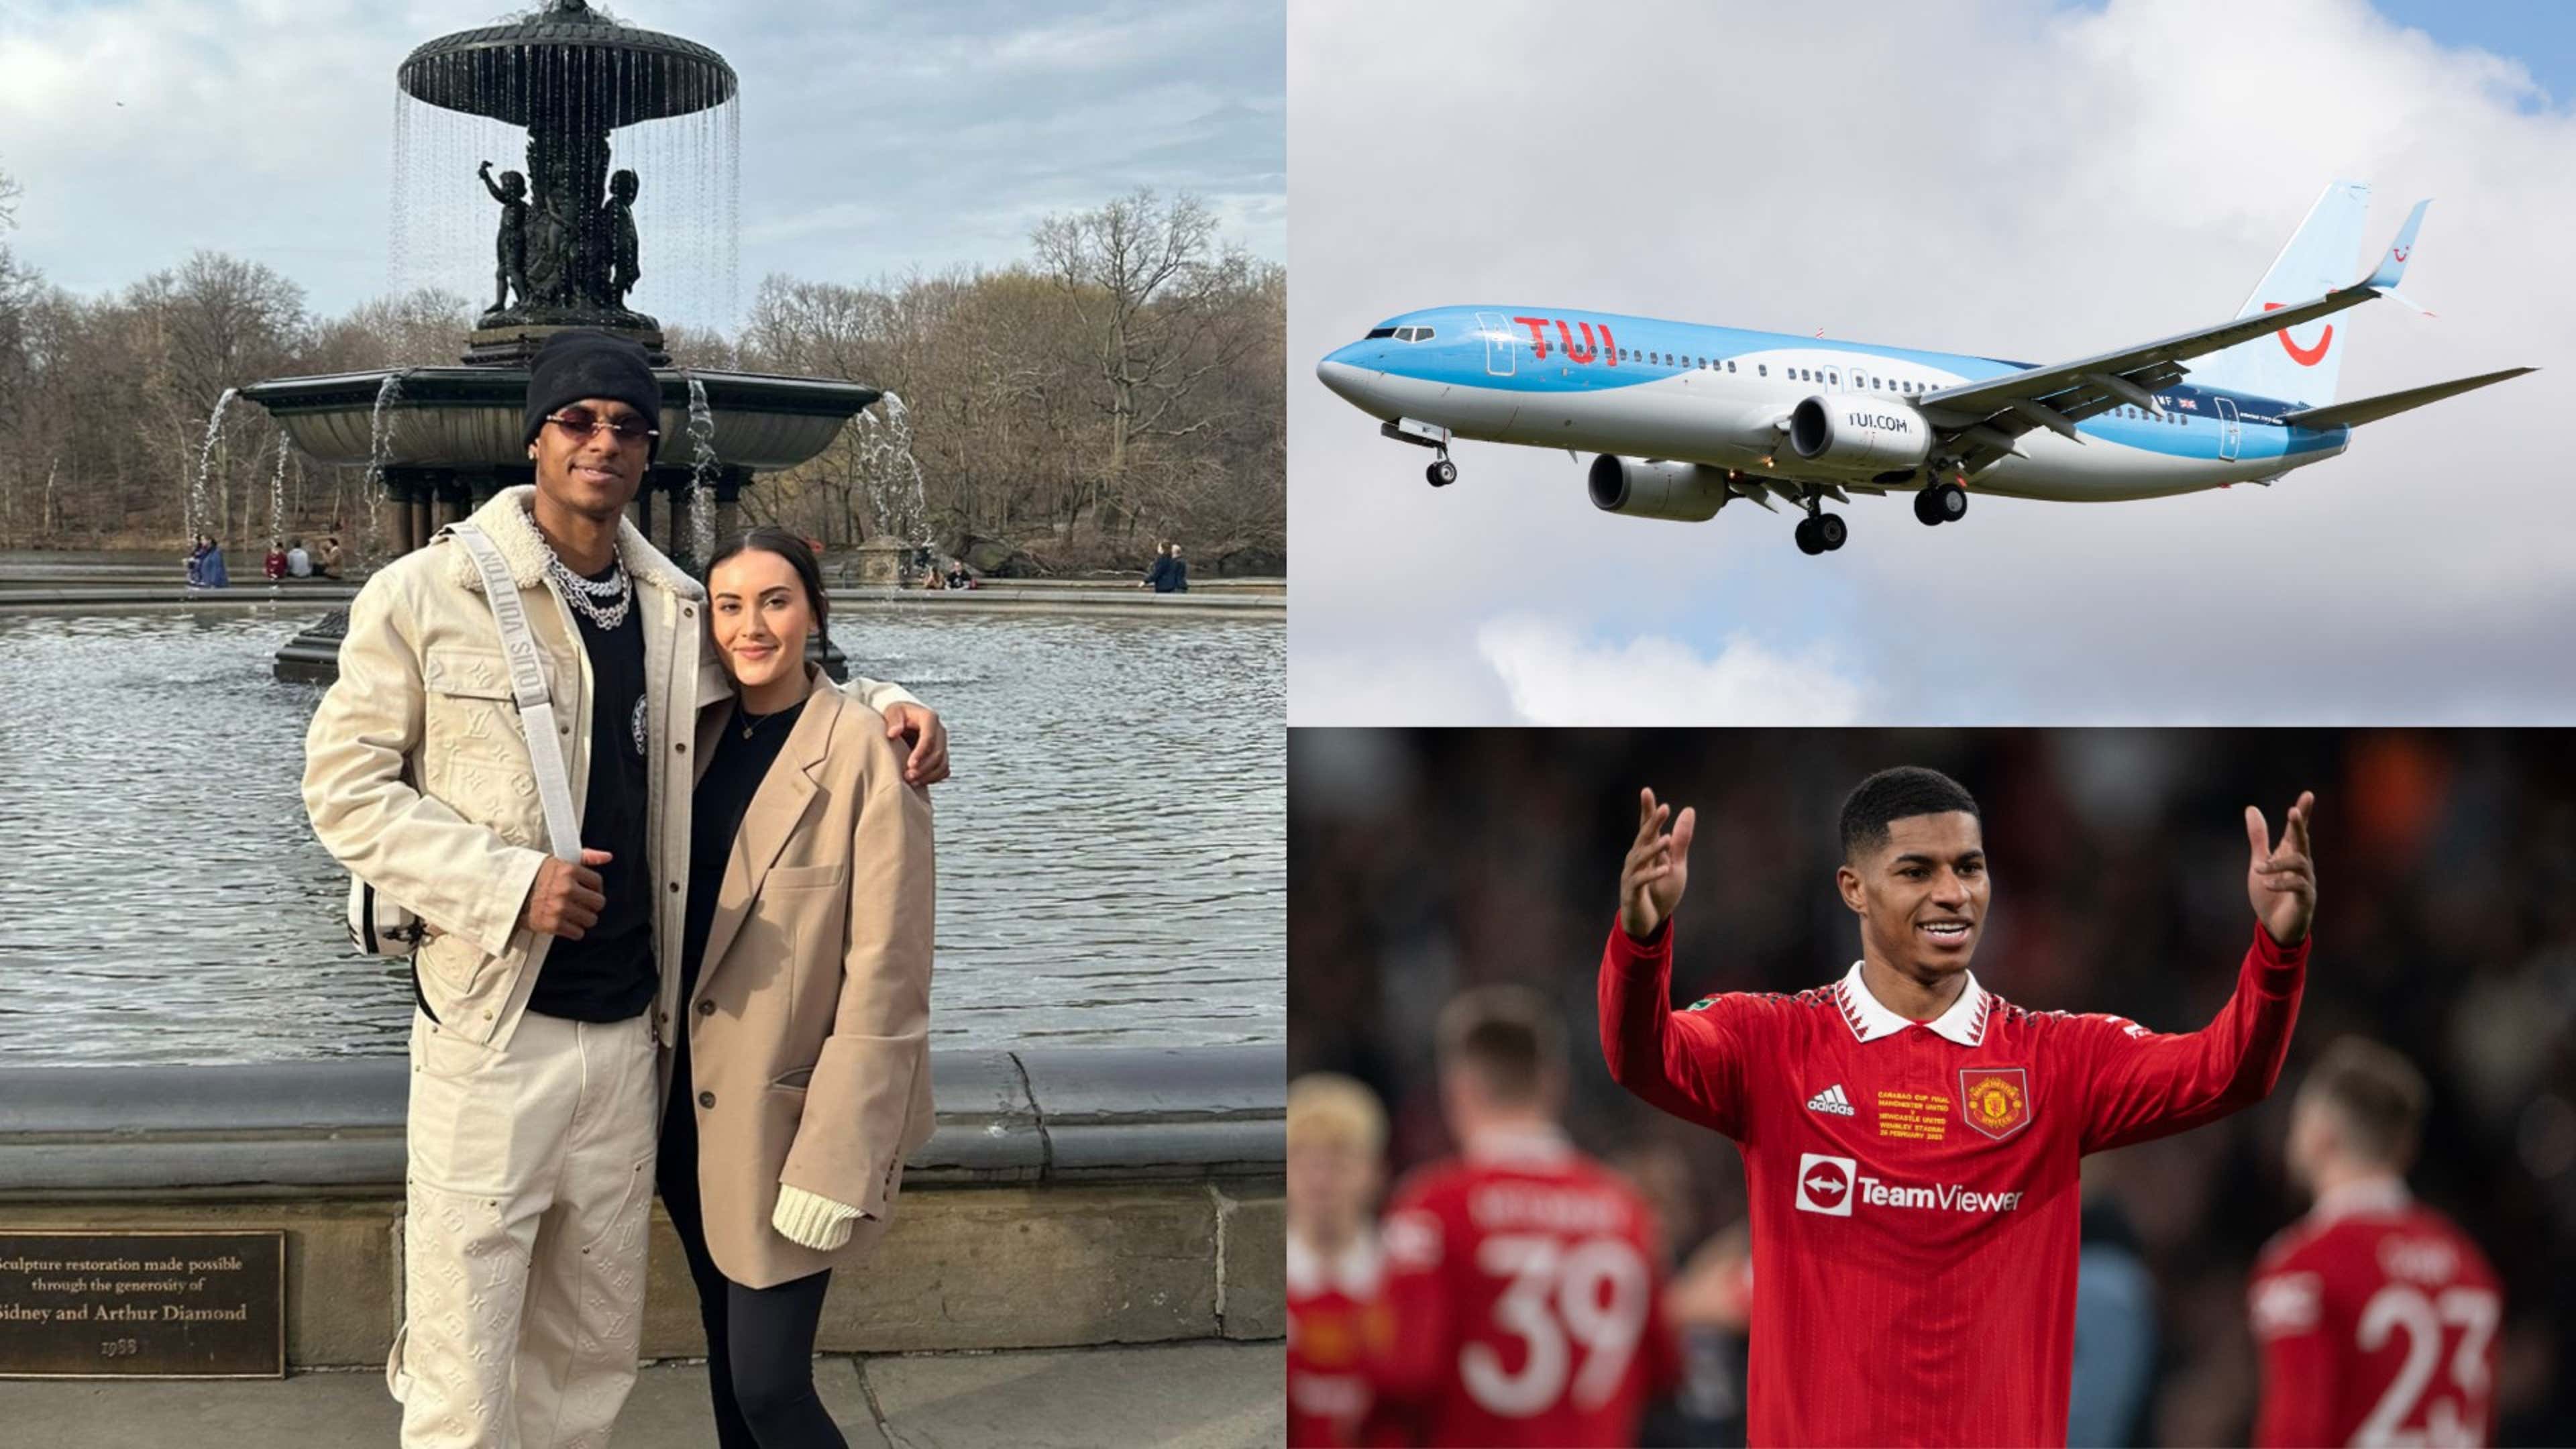 Marcus Rashford paid £240k to RENT Boeing 737 plane that seats over 125  people for romantic New York trip with fiancée Lucia Loi